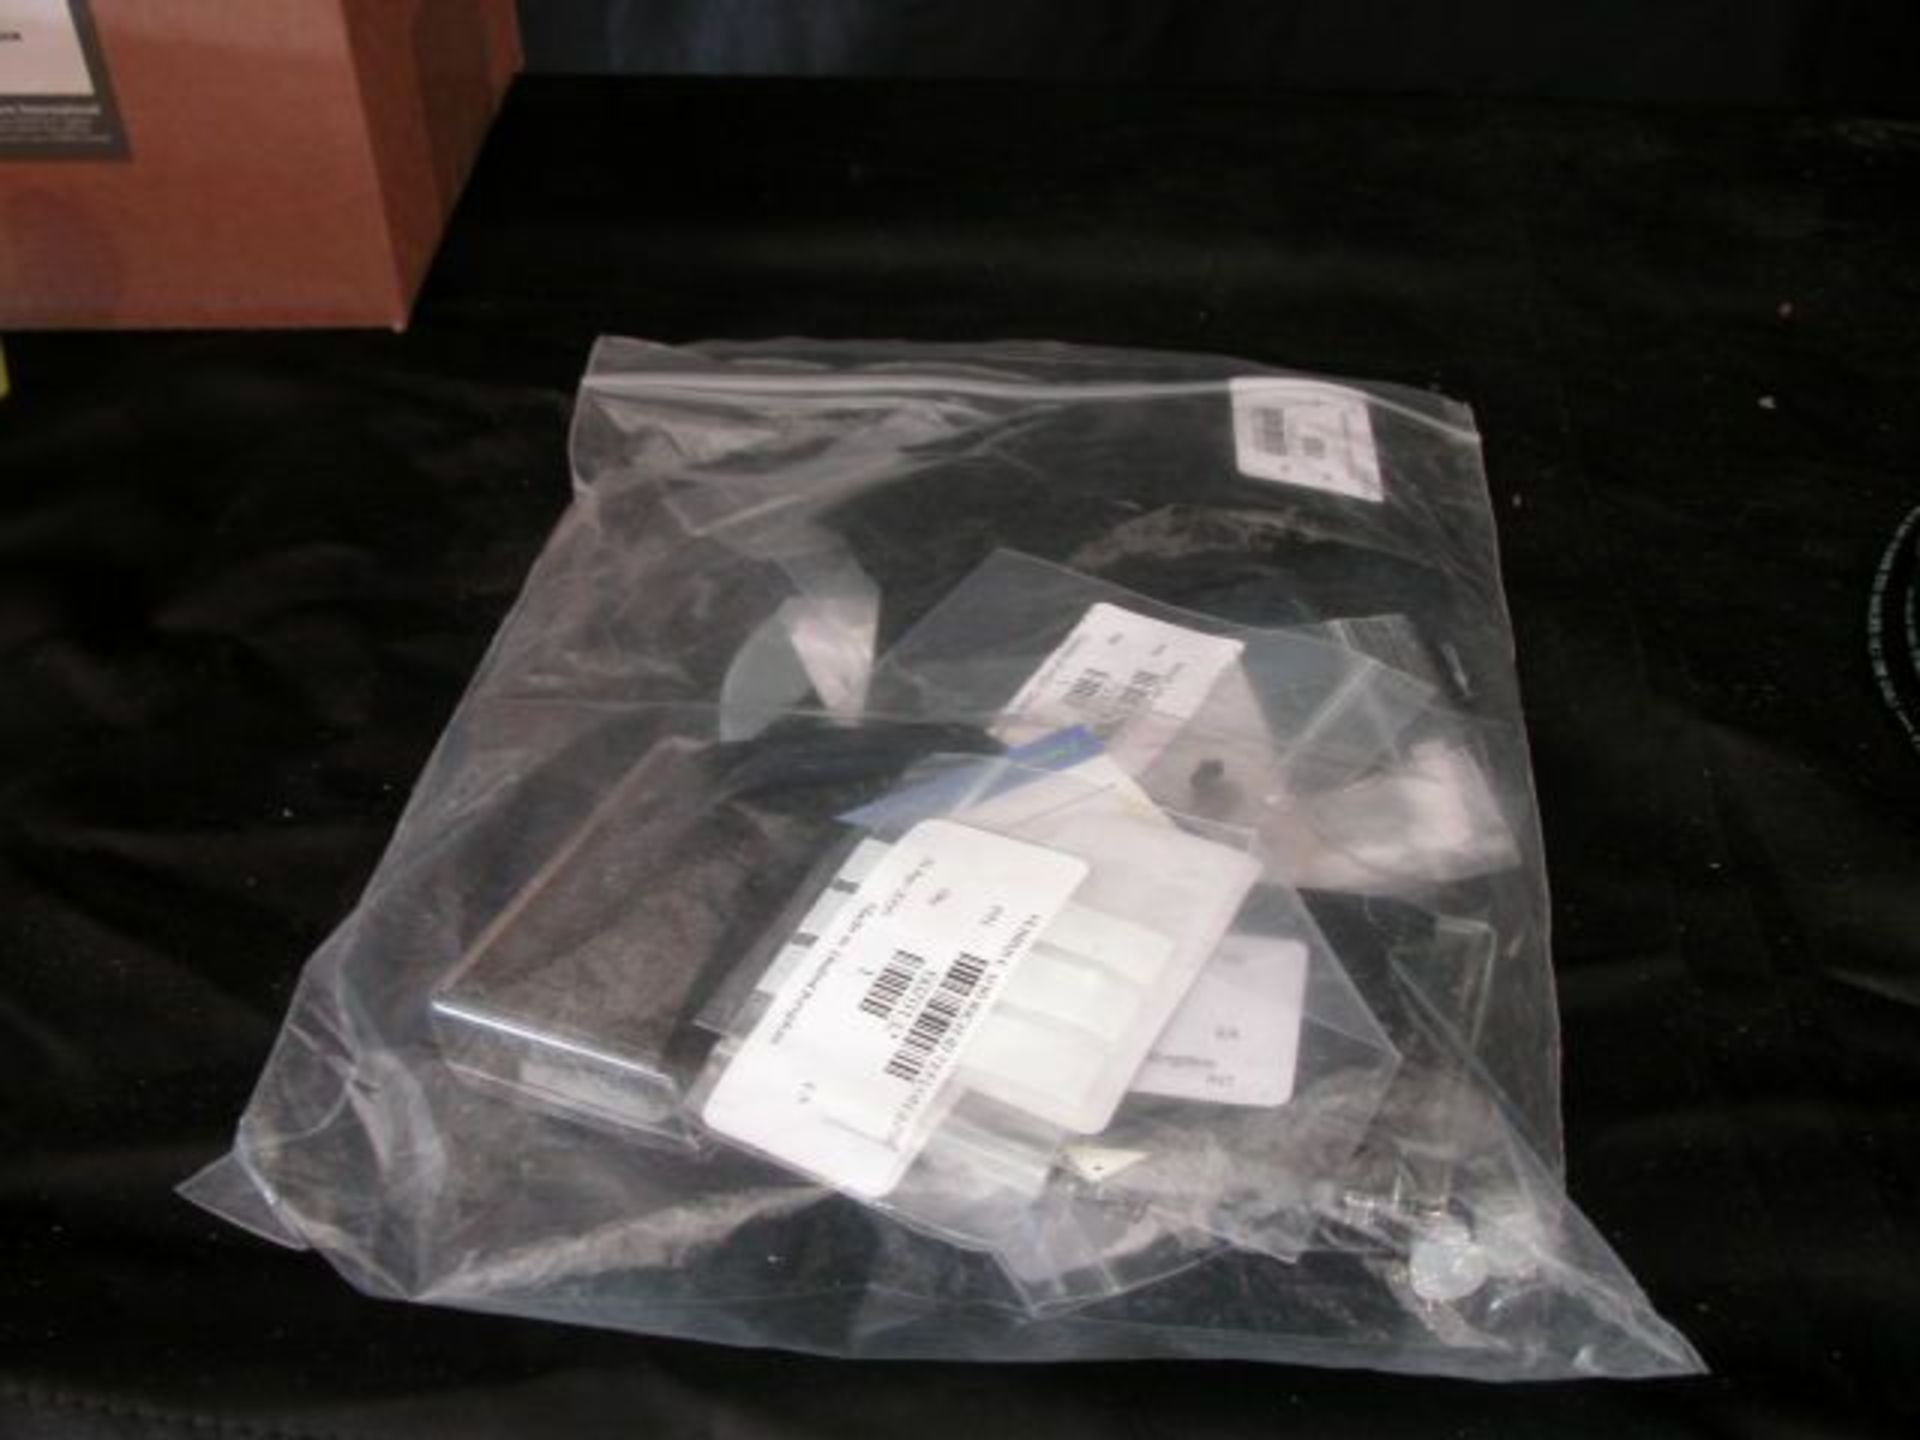 Waters/Micromass Q-Tof Ultima Mass Spectrometer P.M. KIT W/ Extras, Qty 1, 321118842113 - Image 9 of 13